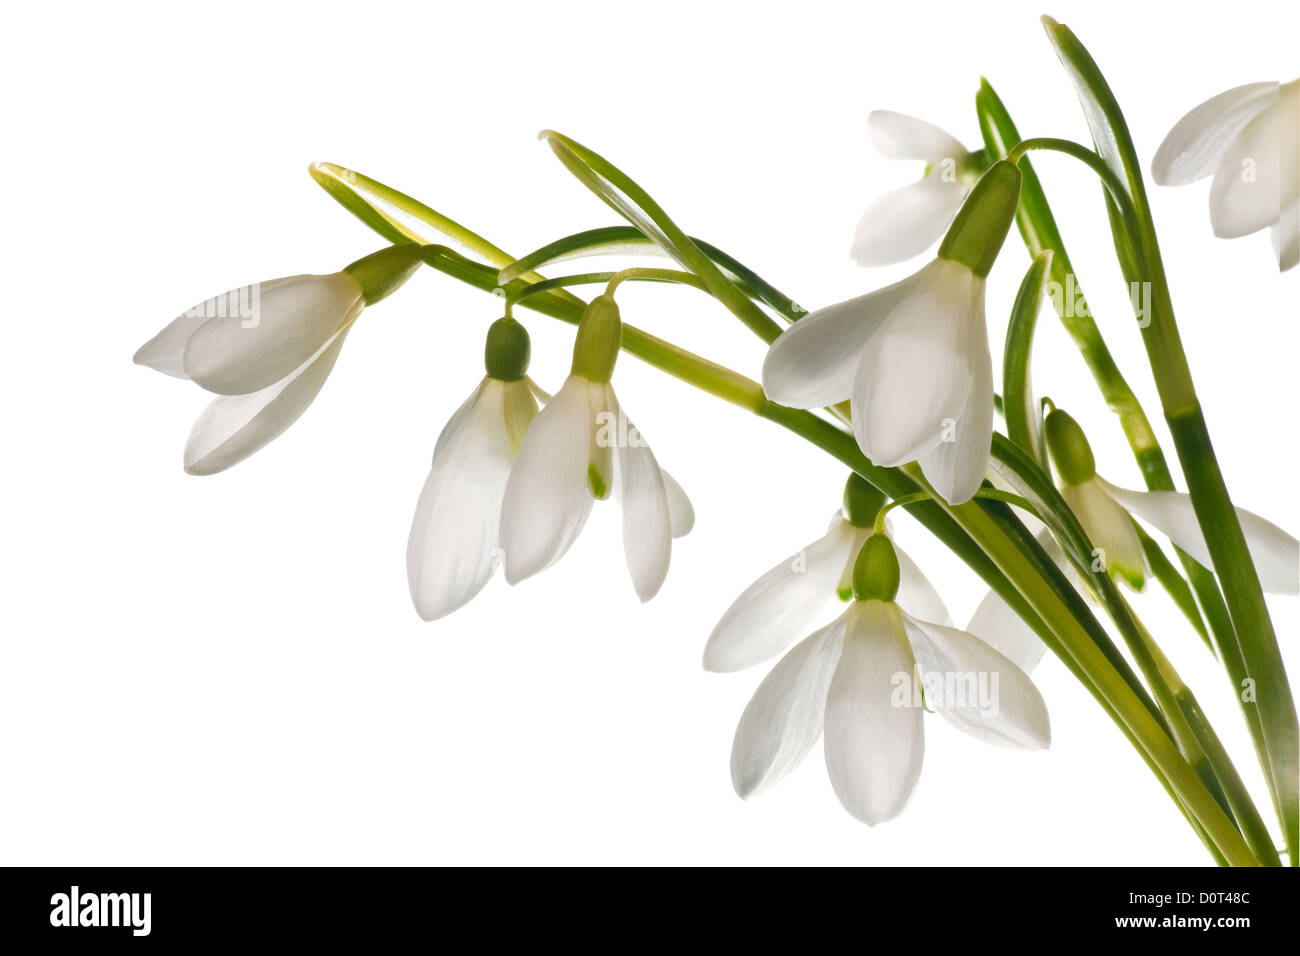 snowdrop flowers nosegay isolated on white Stock Photo